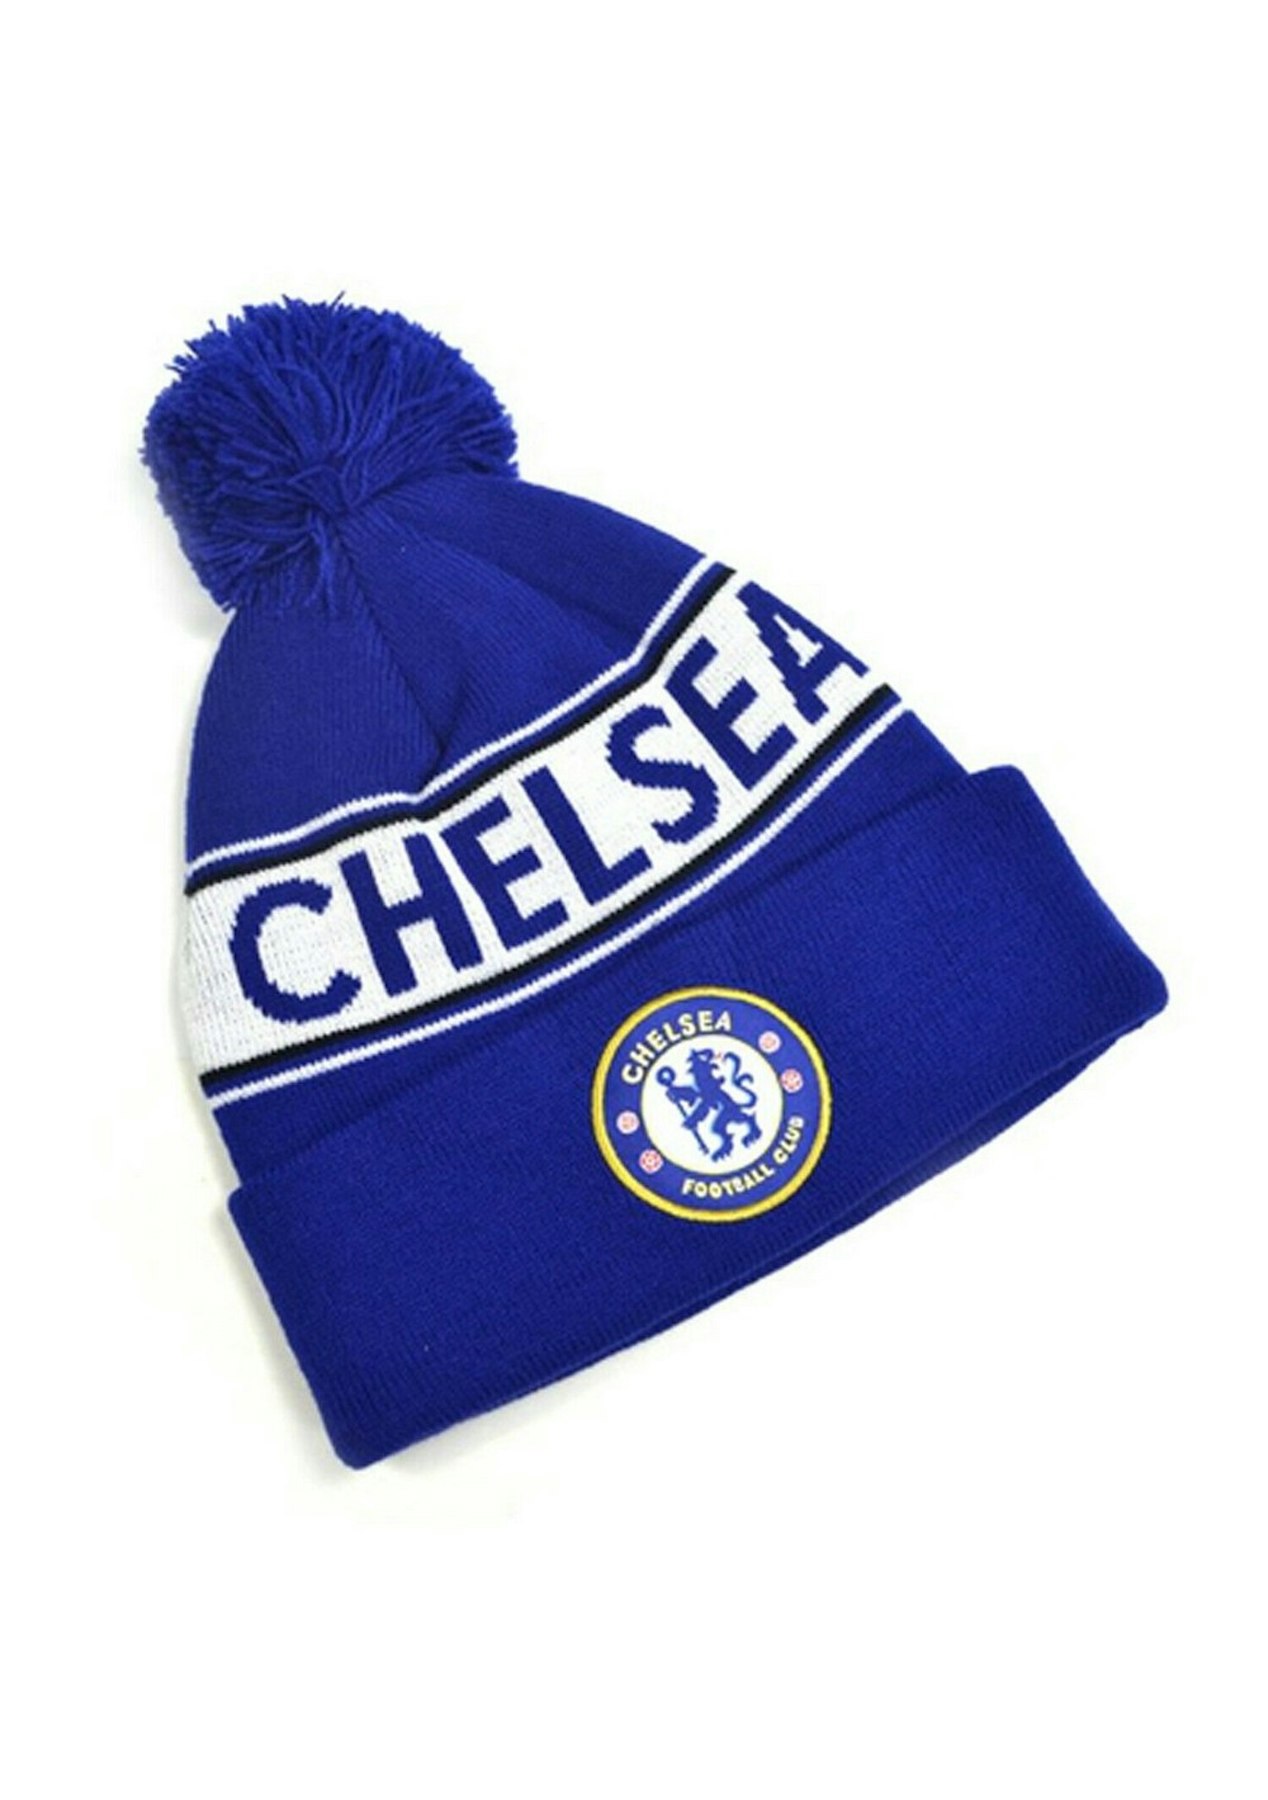 Chelsea FC Official Adults Knitted Winter Football Crest Hat 